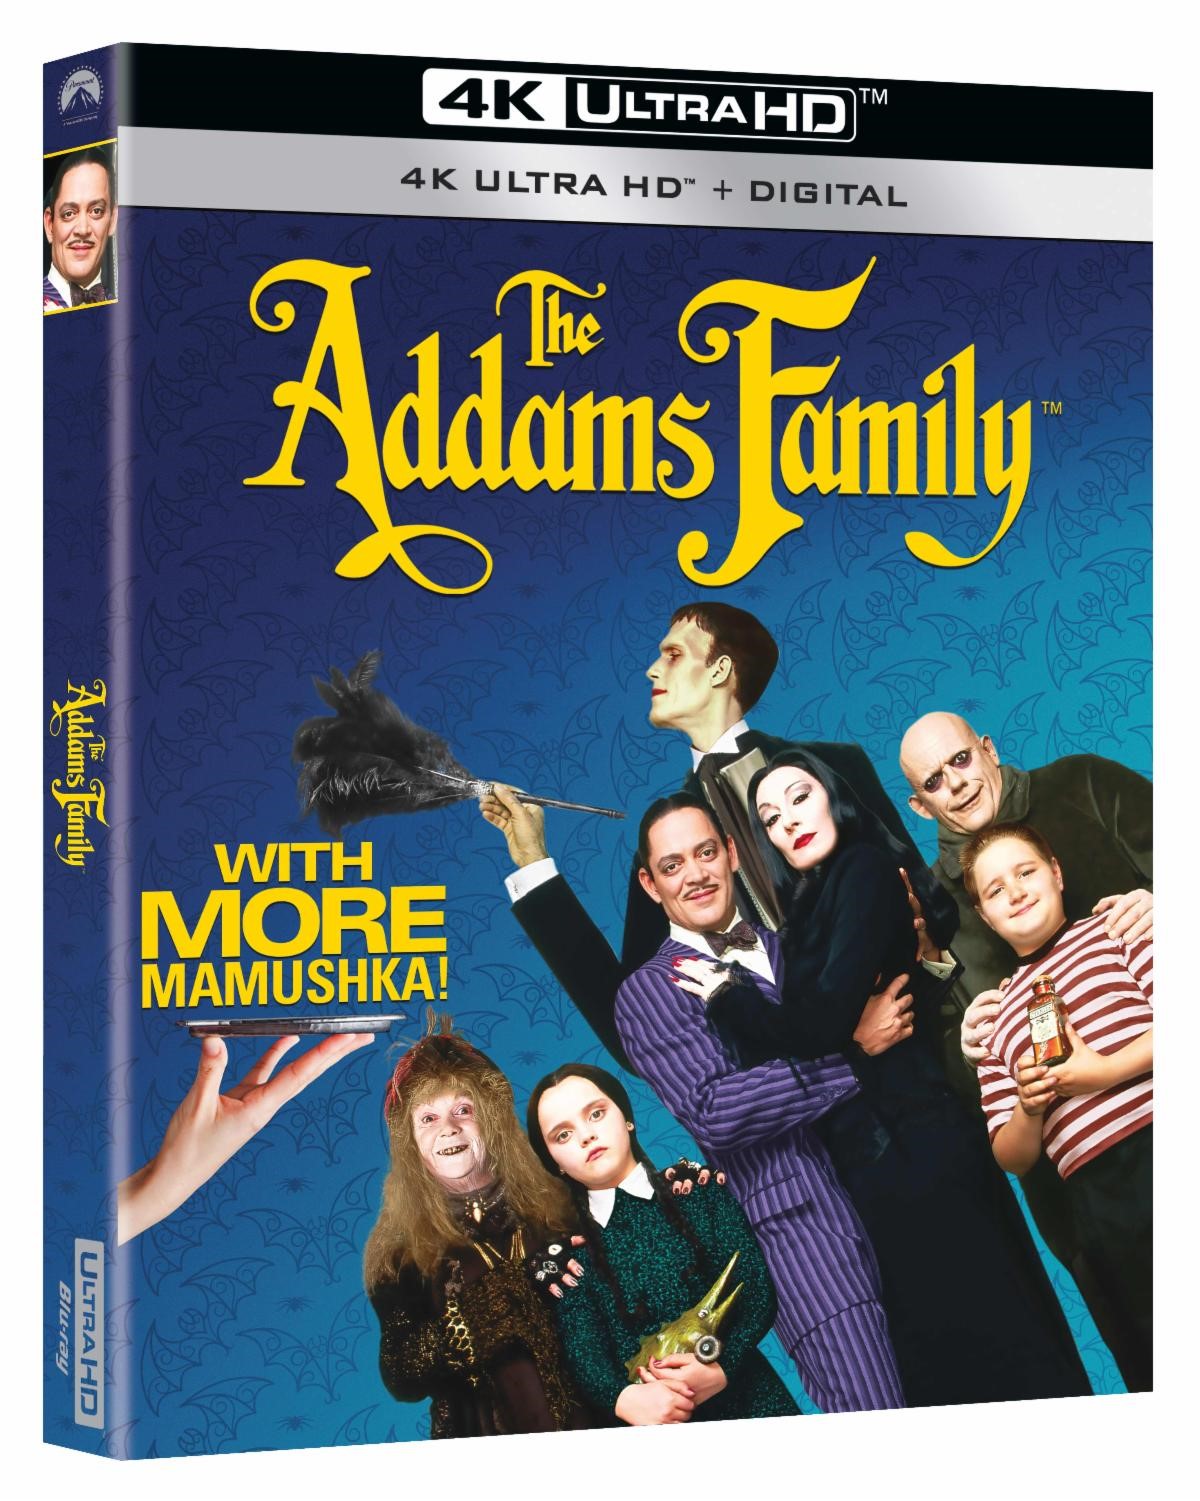 THE ADDAMS FAMILY arrives for the first time on Digital 4K Ultra HD on October 19, 2021, as well as 4K Ultra HD Blu-ray November 9, 2021 from Paramount Home Entertainment